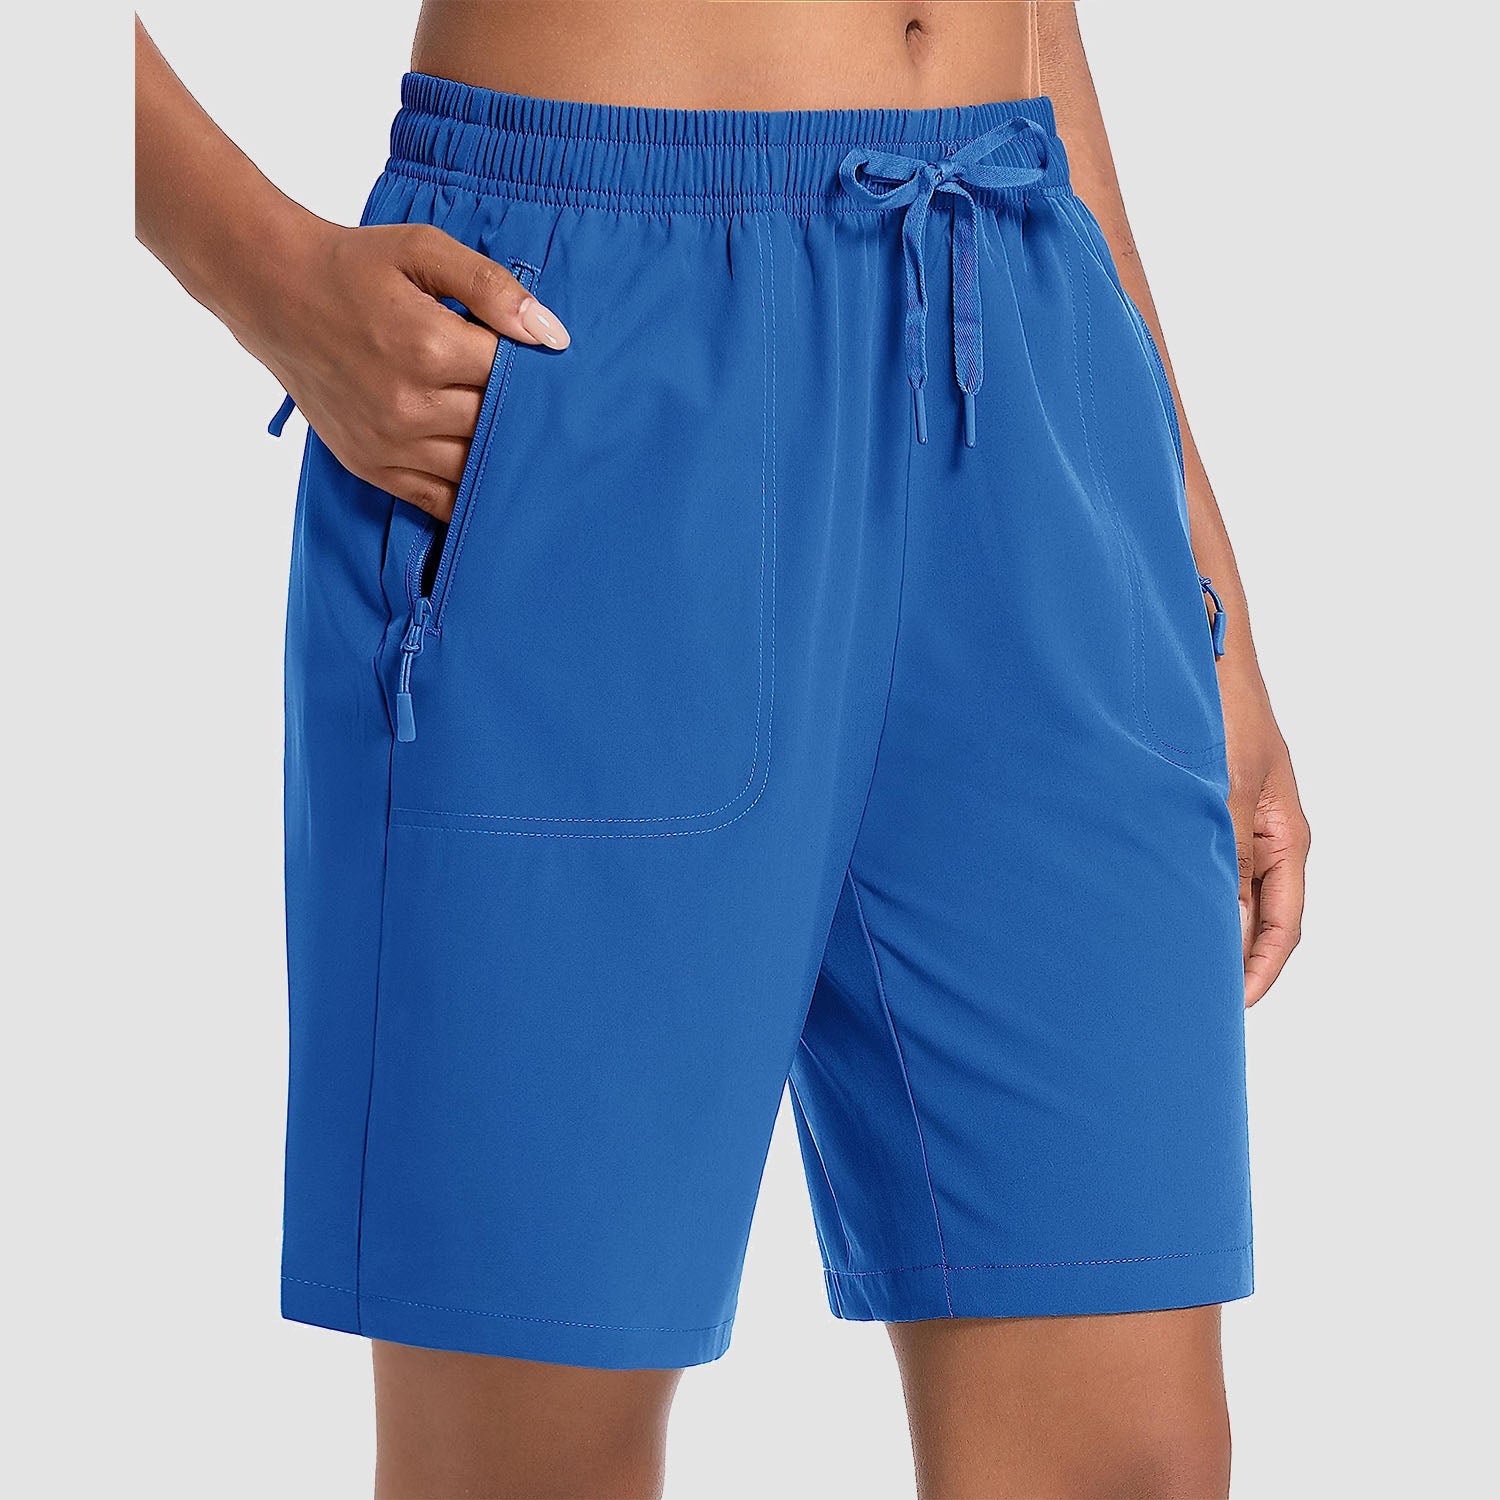 Women's Hiking Shorts Lightweight Quick Dry 8" Golf Shorts Water Resistant with 3 Zipper Pockets